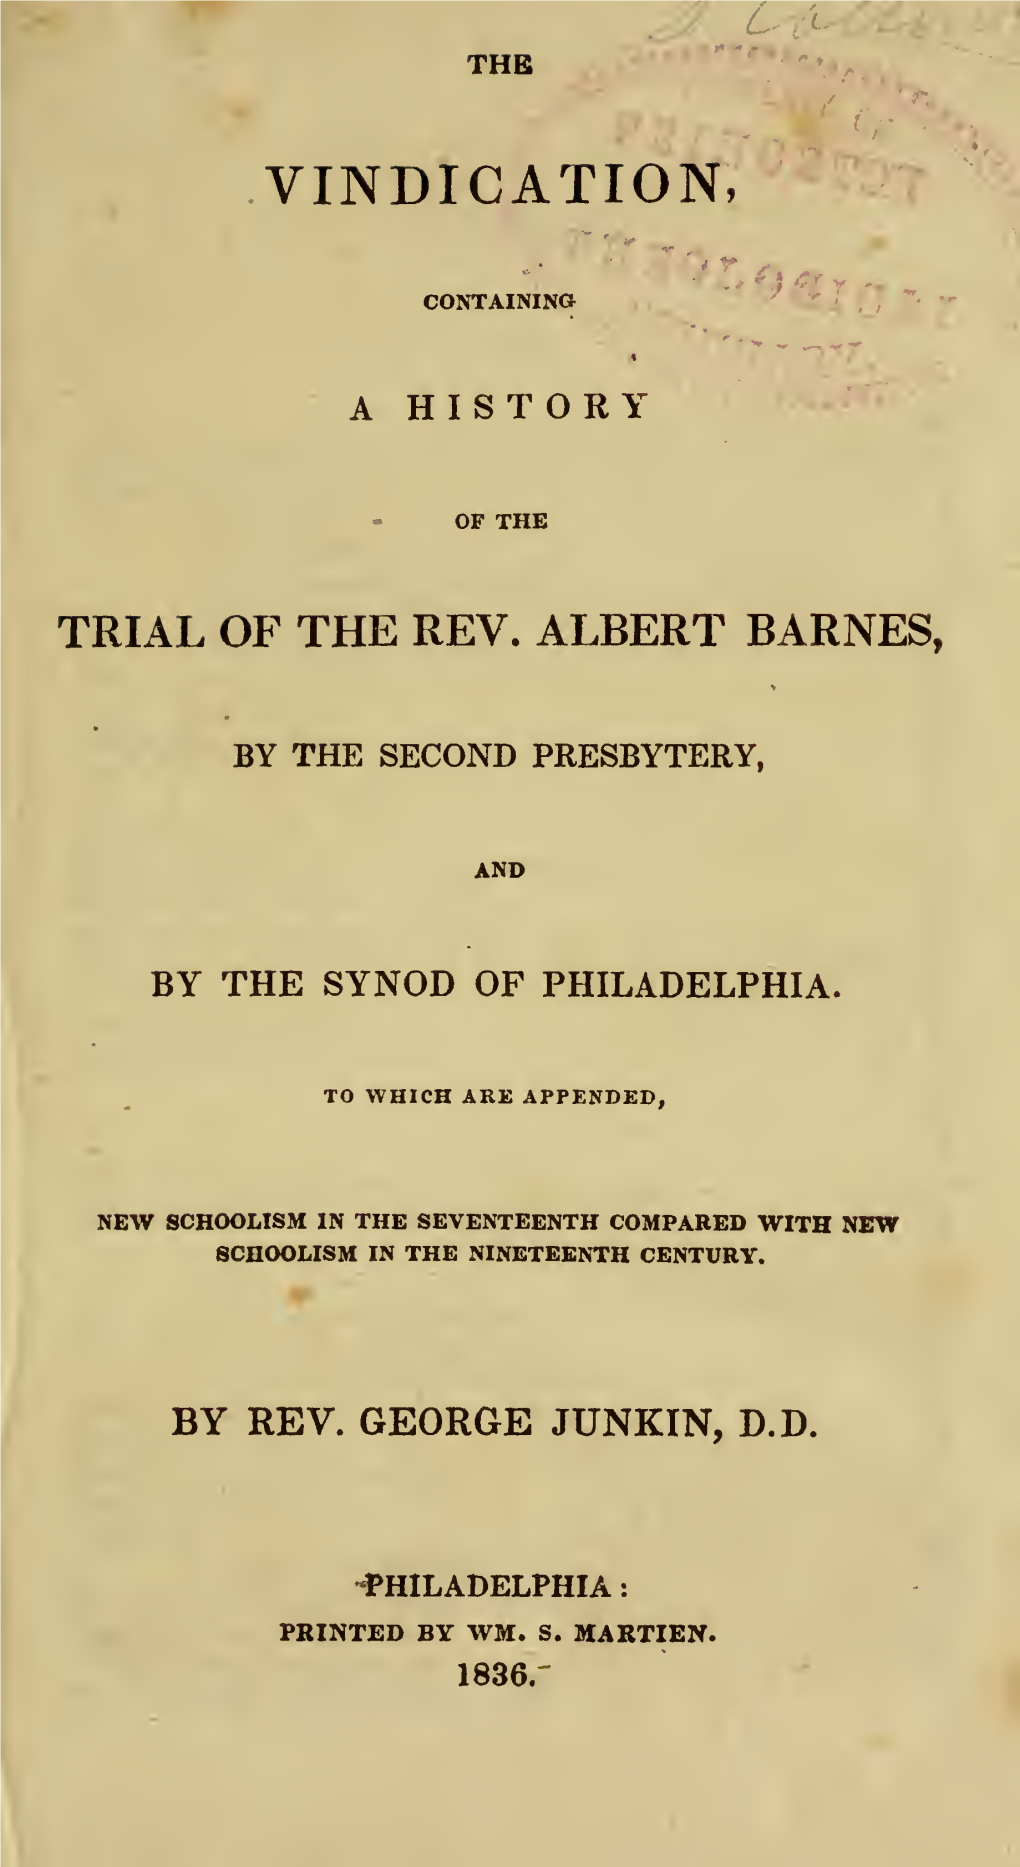 The Vindication, Containing a History of the Trial of the Rev. Albert Barnes